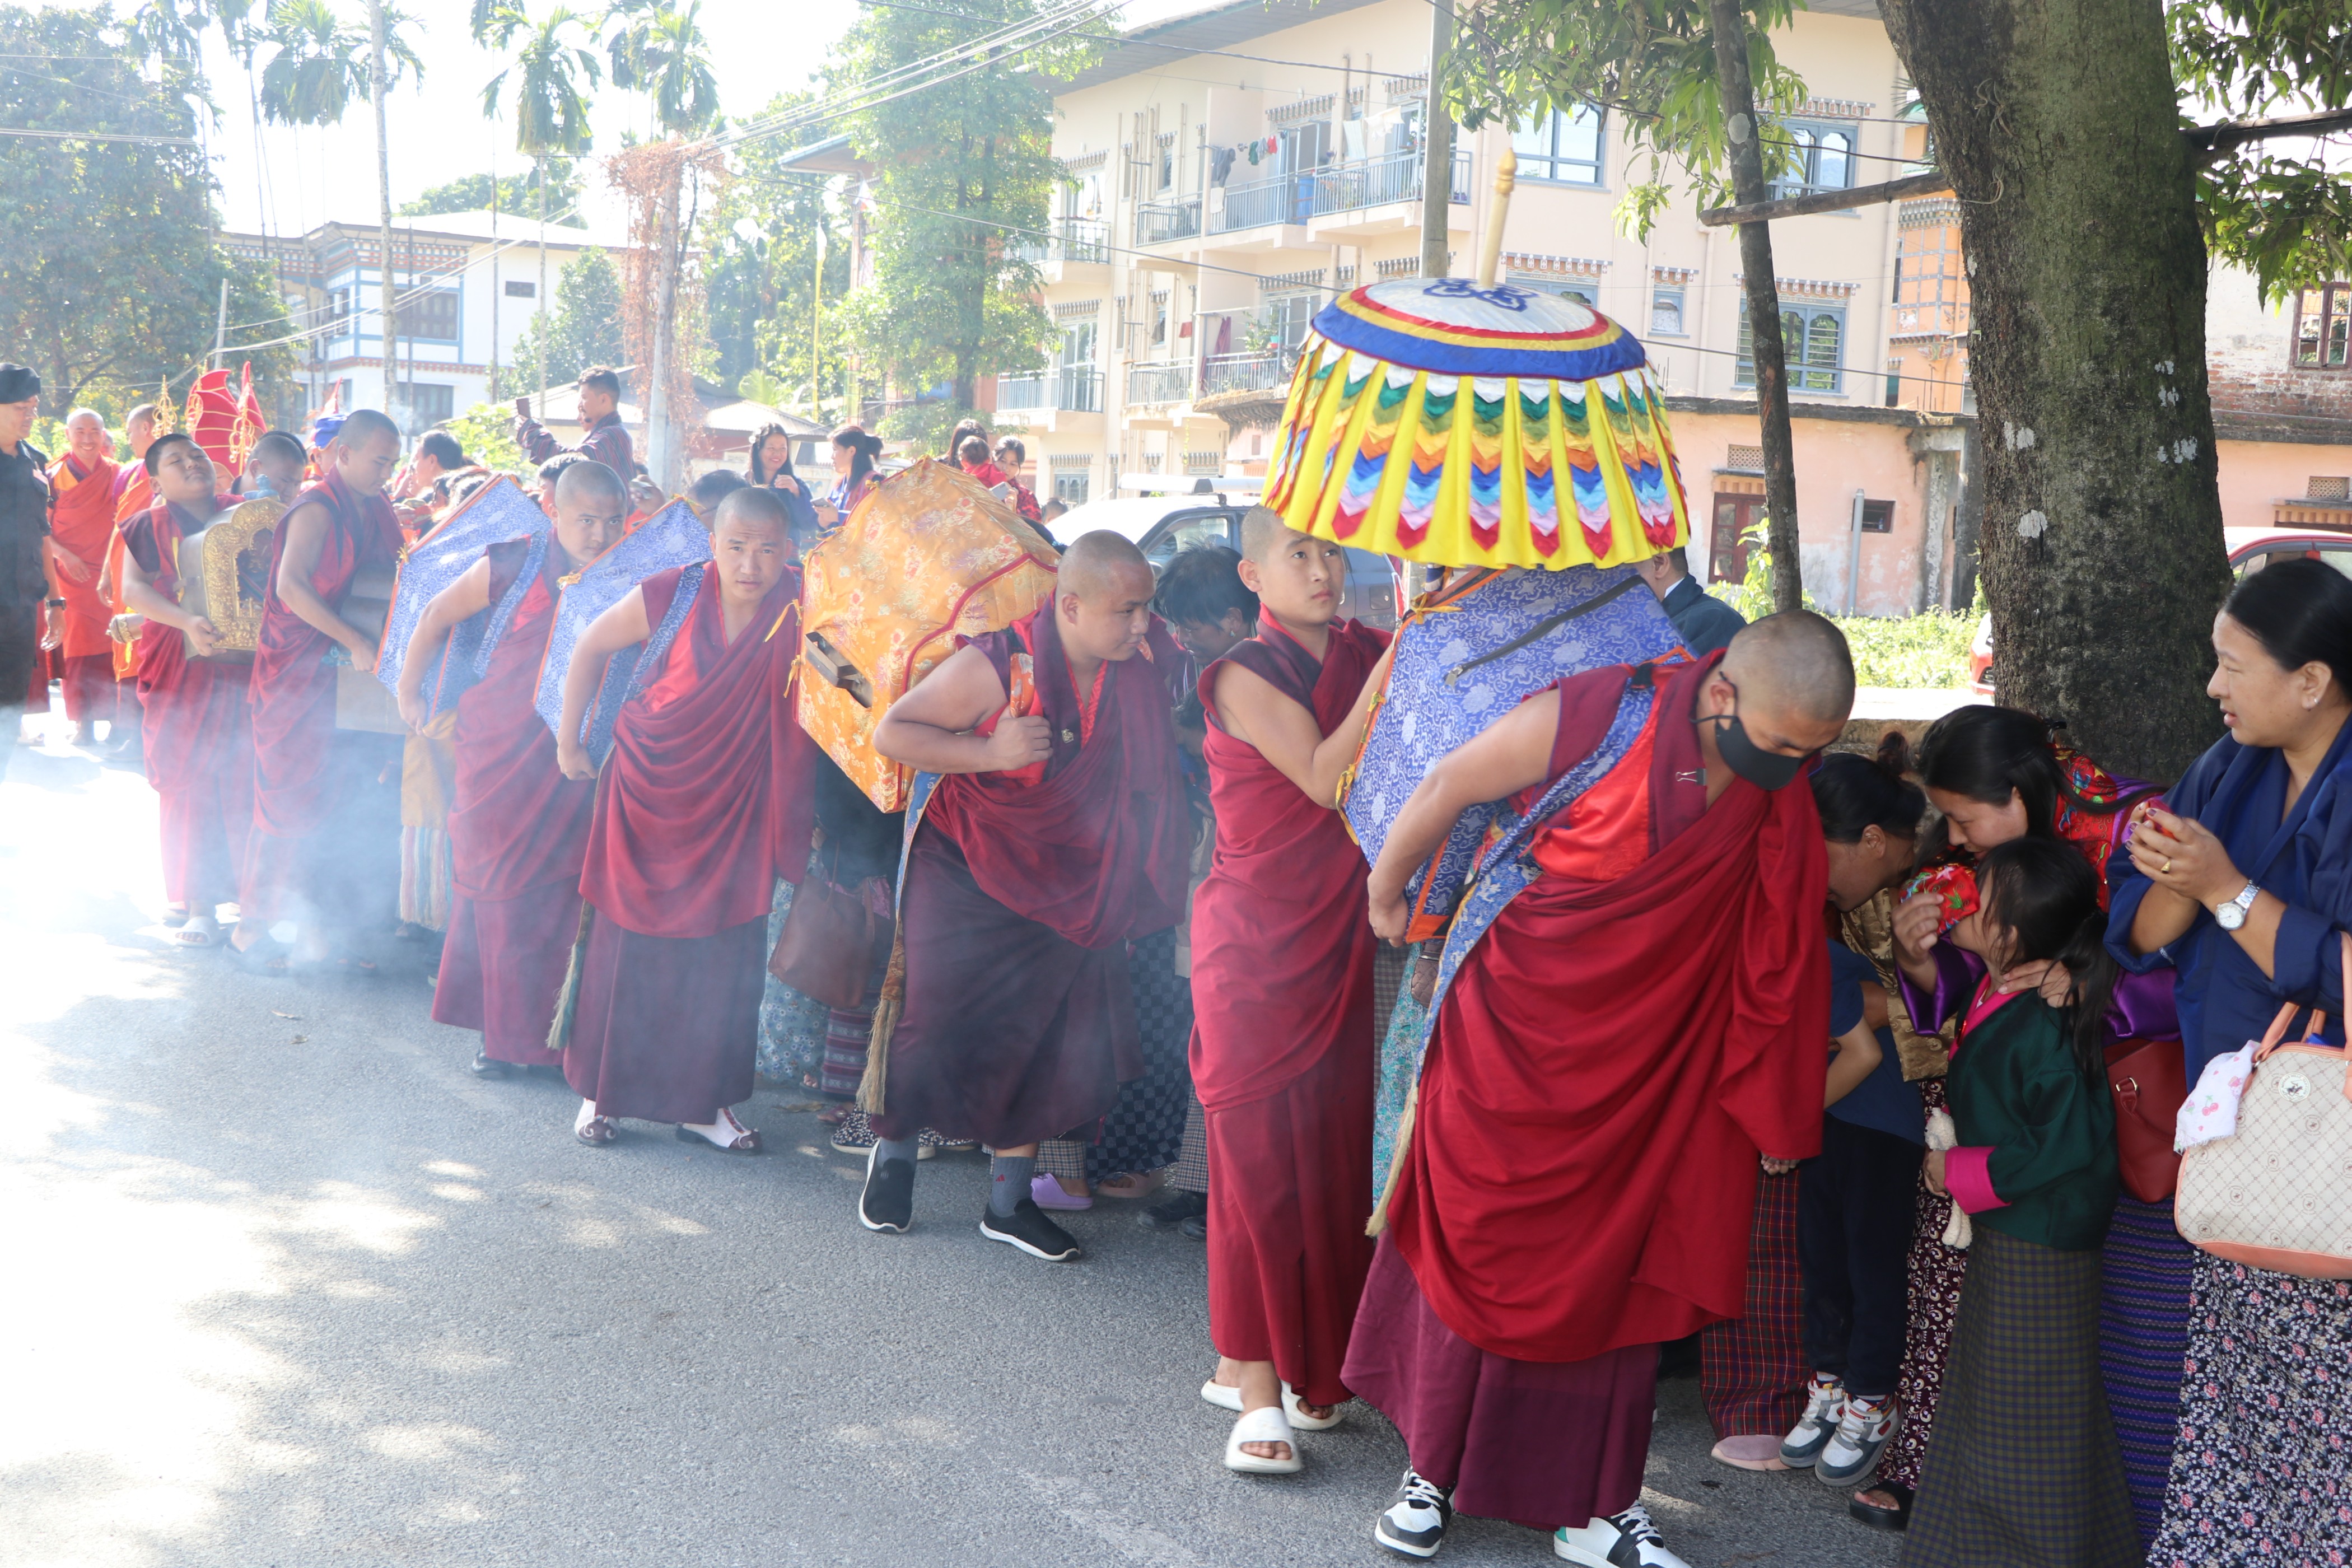 Dzongda and relevant officials from Dzongkhag administration, Regional Heads, DT Thrizin and Gups attended the program. Hundreds of people gathered along the way to receive blessings from the sacred relics and Sangha.